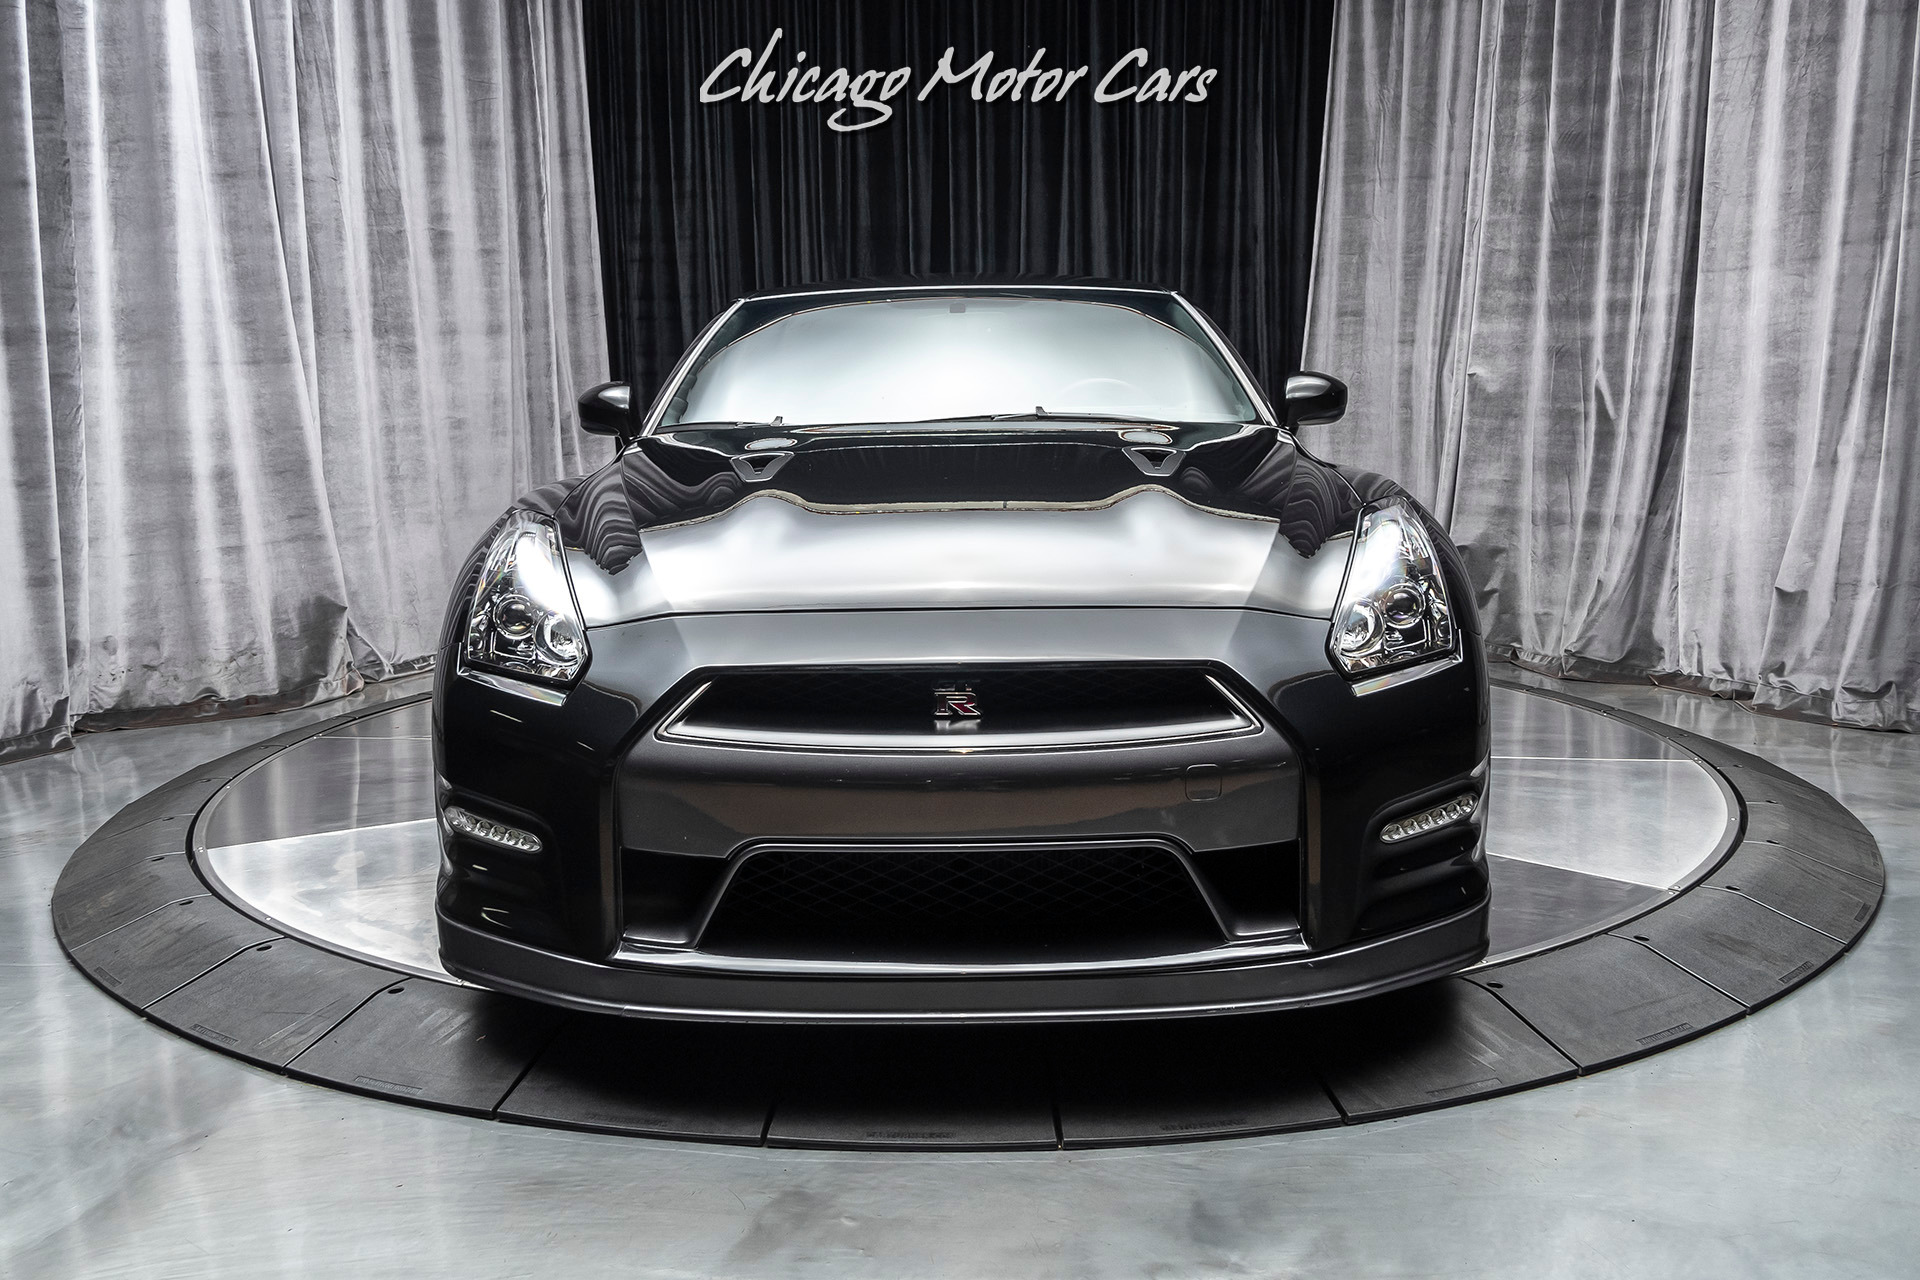 Used-2014-Nissan-GT-R-Black-Edition-800WHP-Built-Engine-Upgraded-Turbos